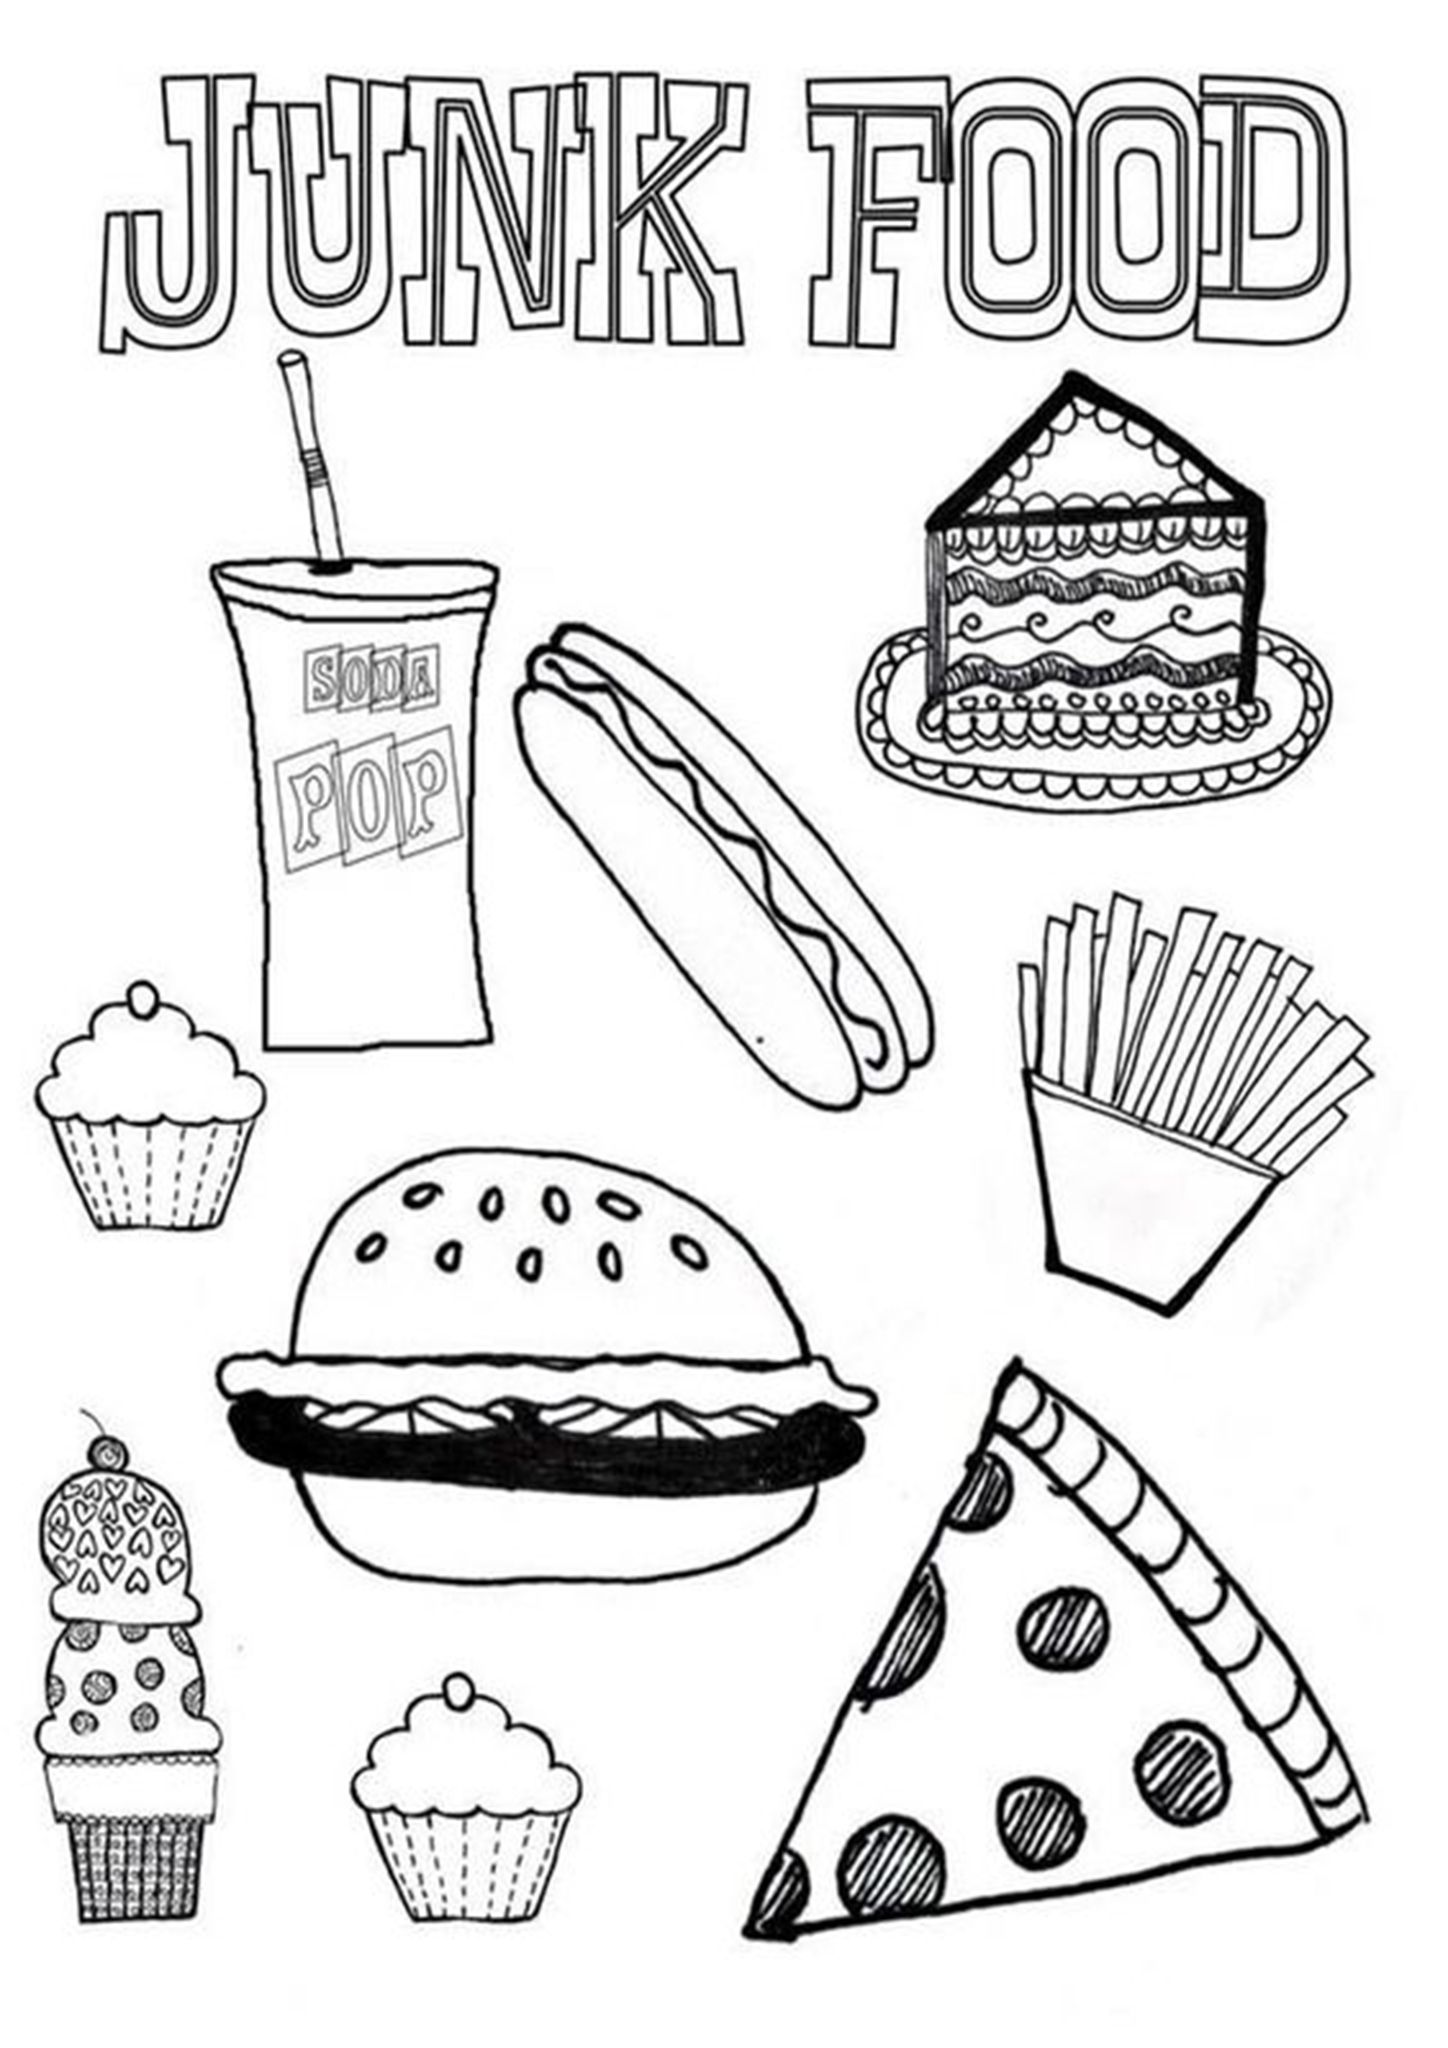 Pin on Dessert & Food Coloring Pages